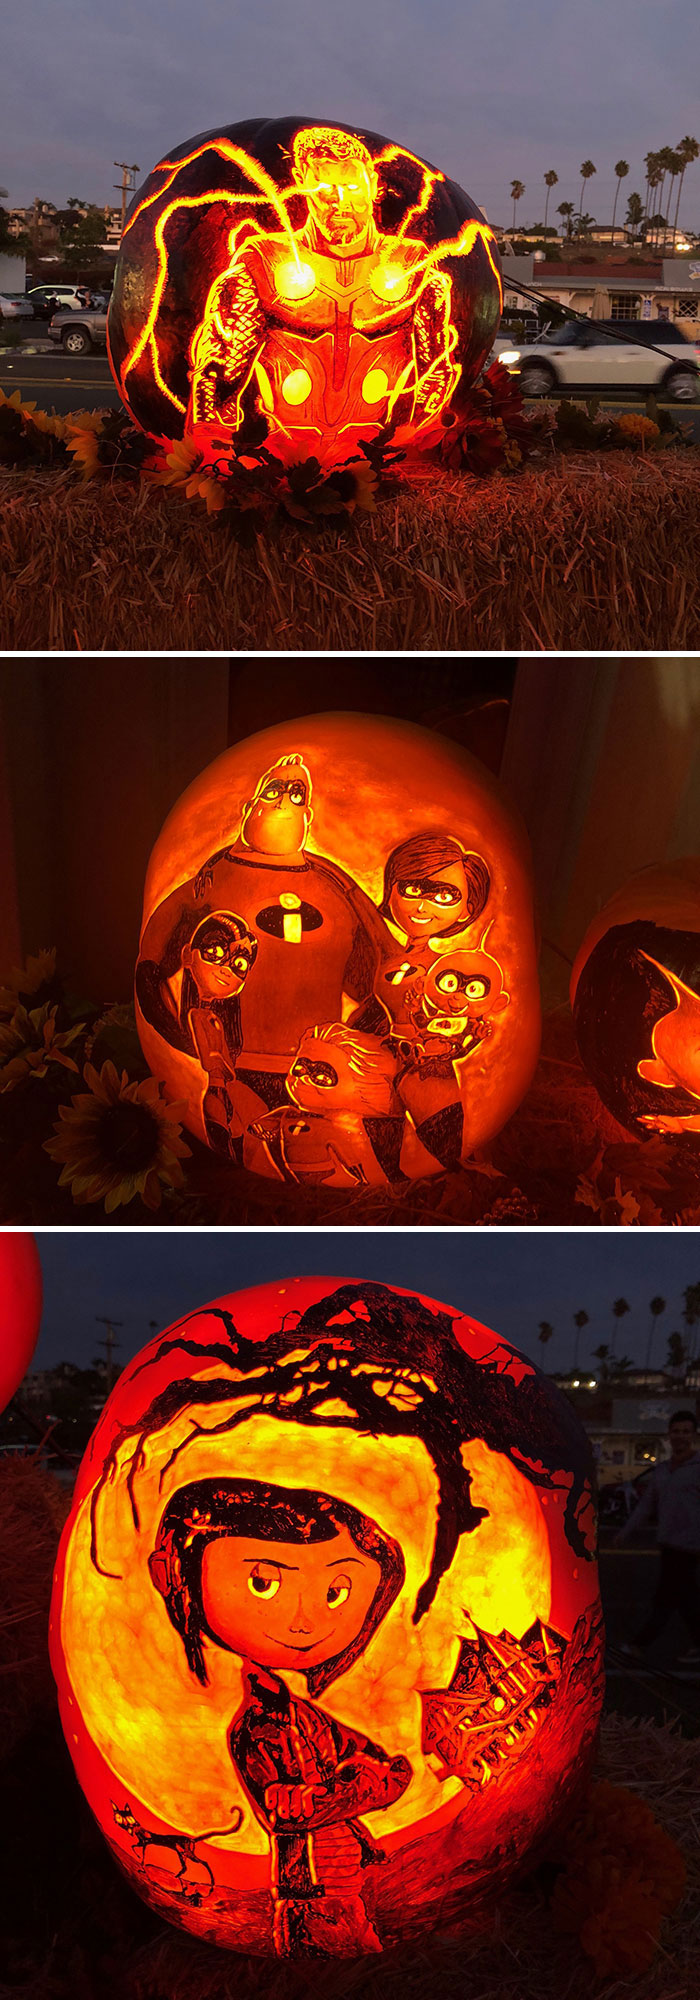 A Few Cool Pumpkins From A Carving Contest In My Community